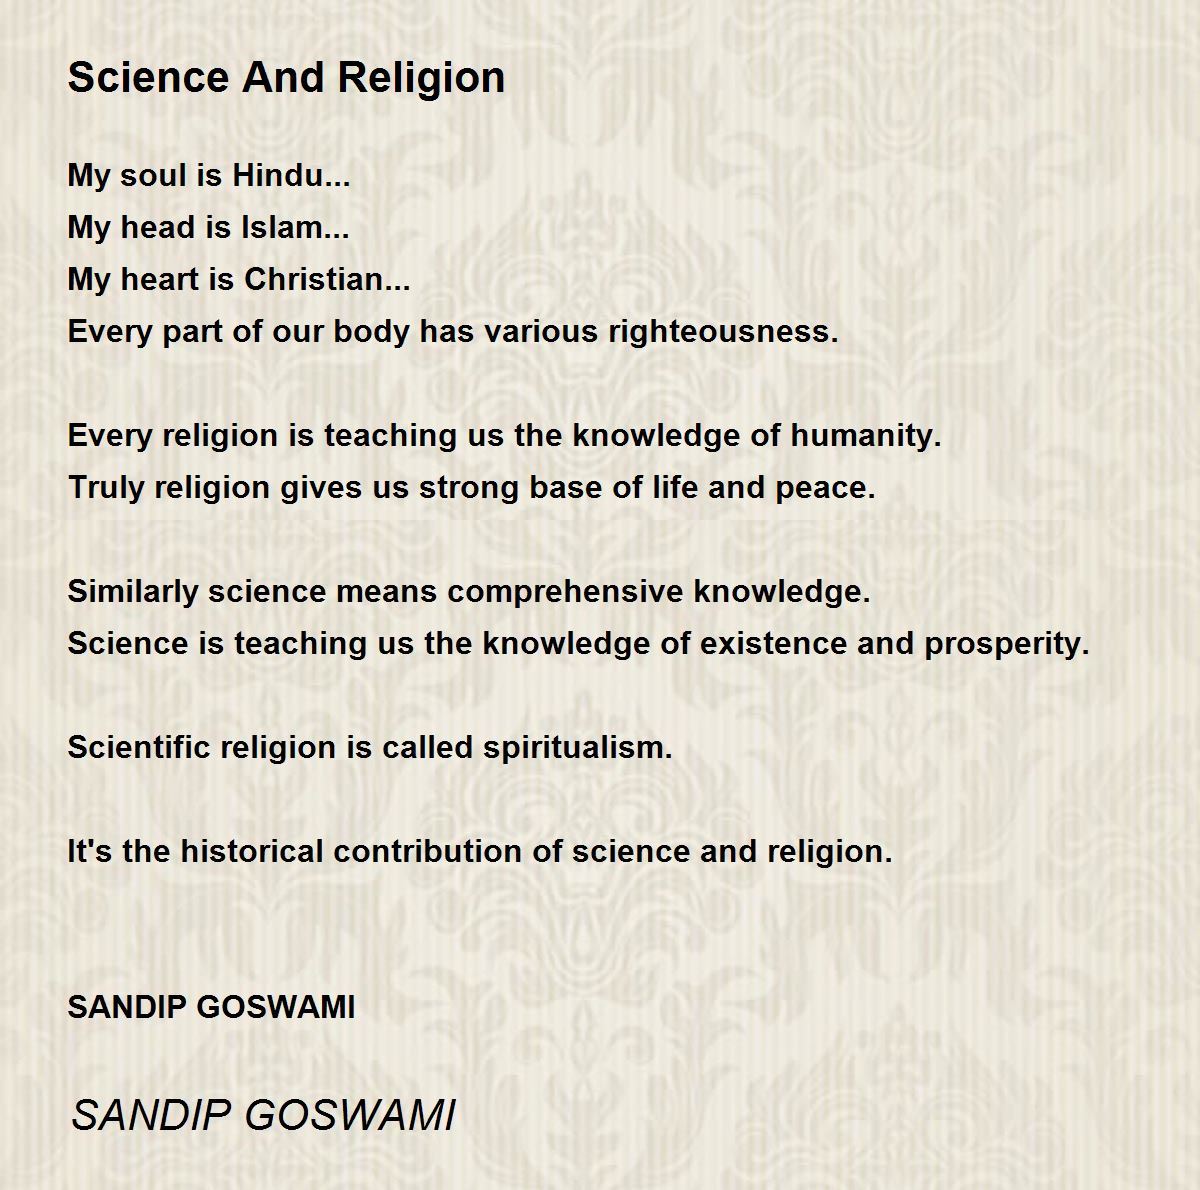 science and religion essay in hindi